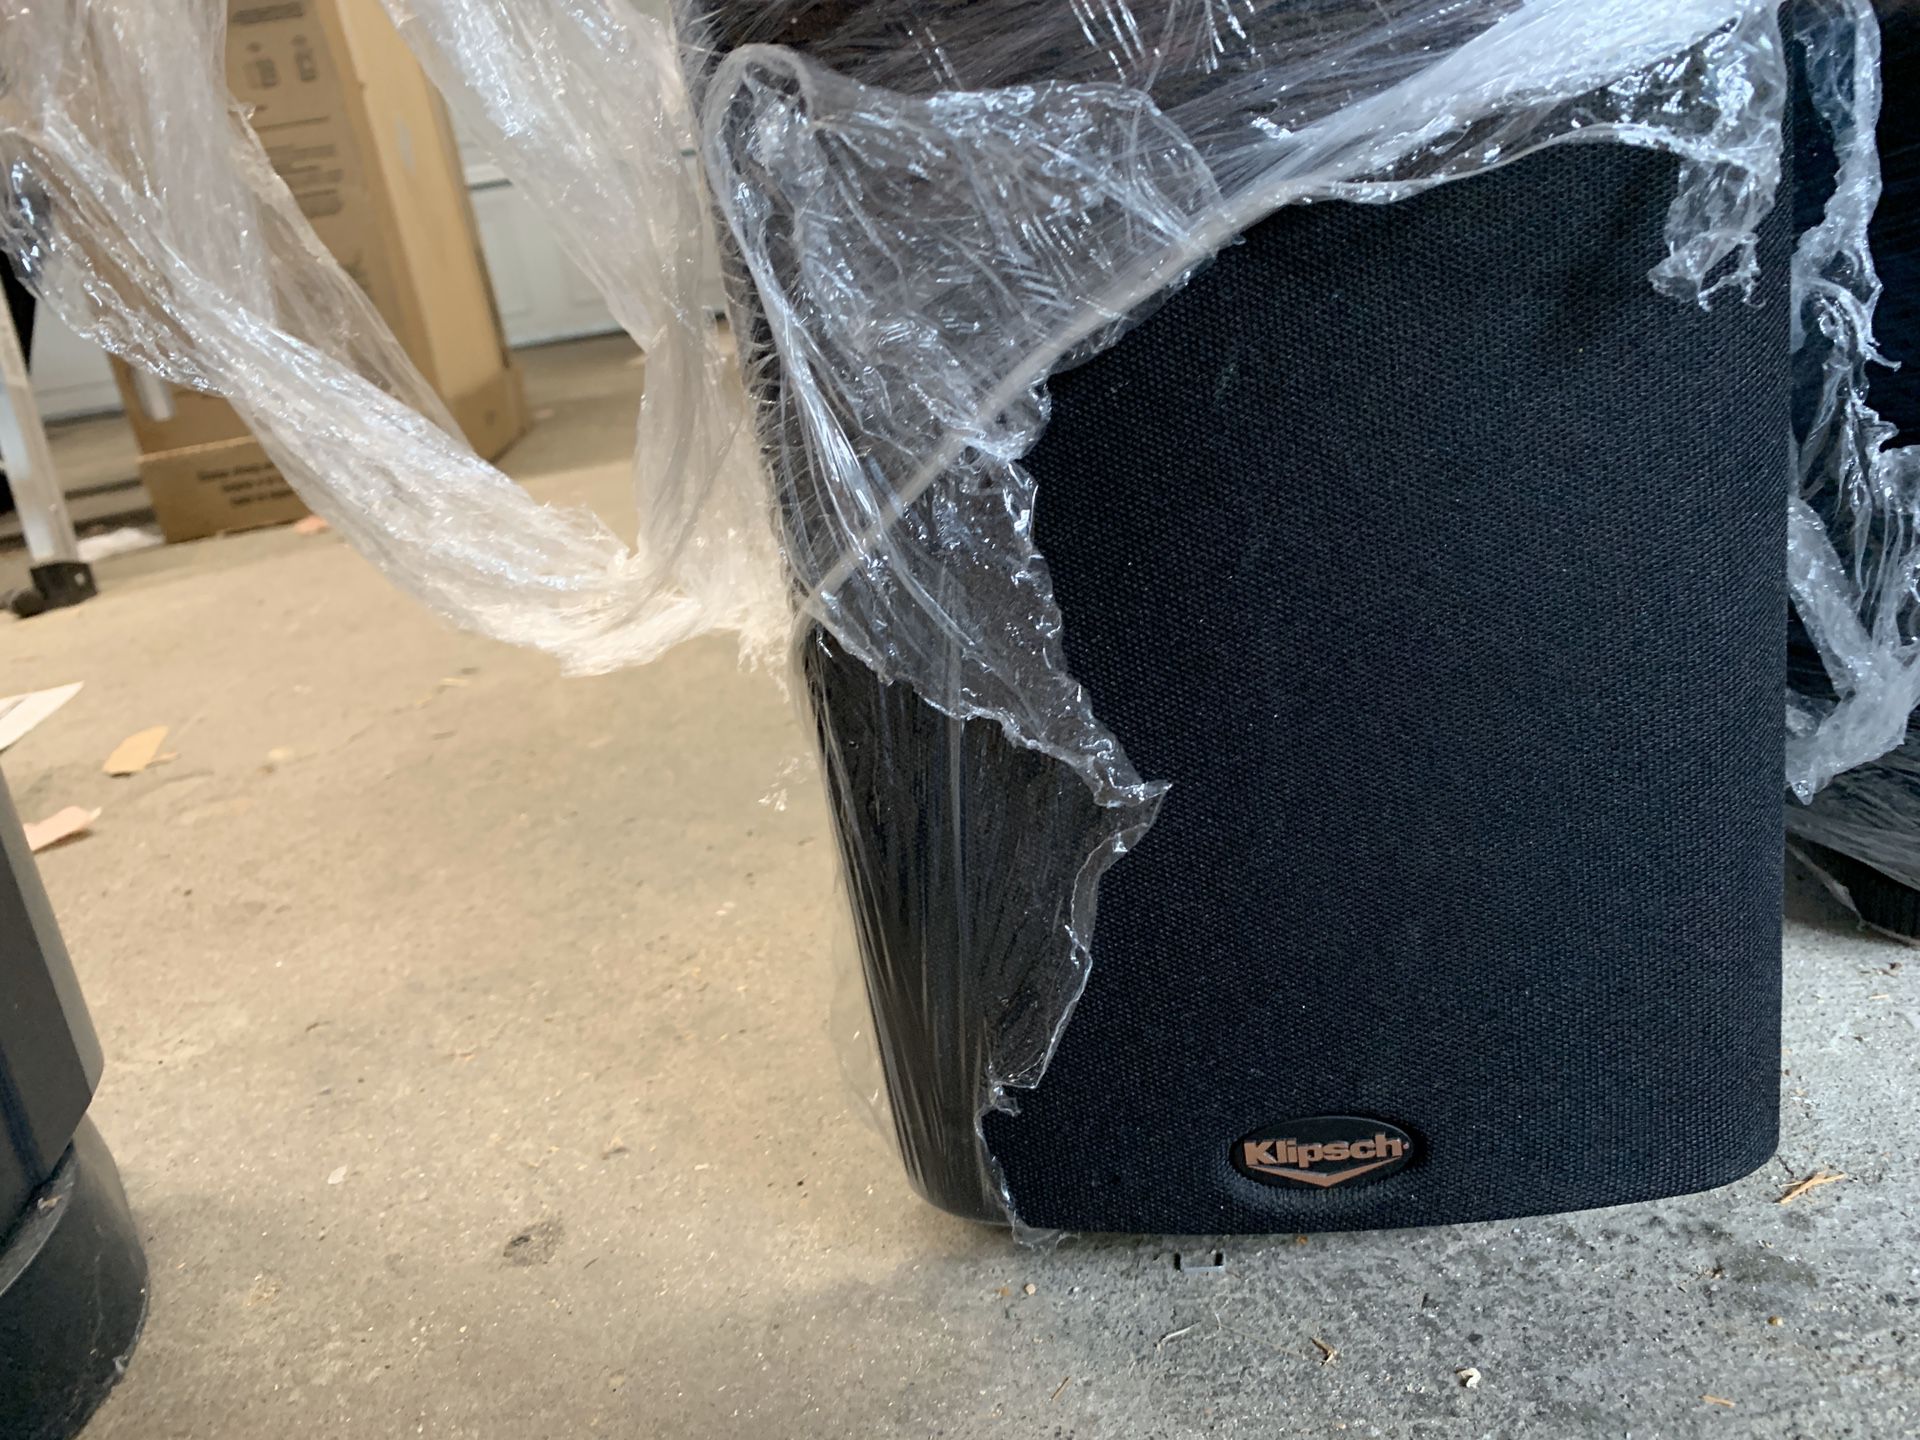 Klipsch SF2 tower speakers. Good condition. SF2Black-0212 0115